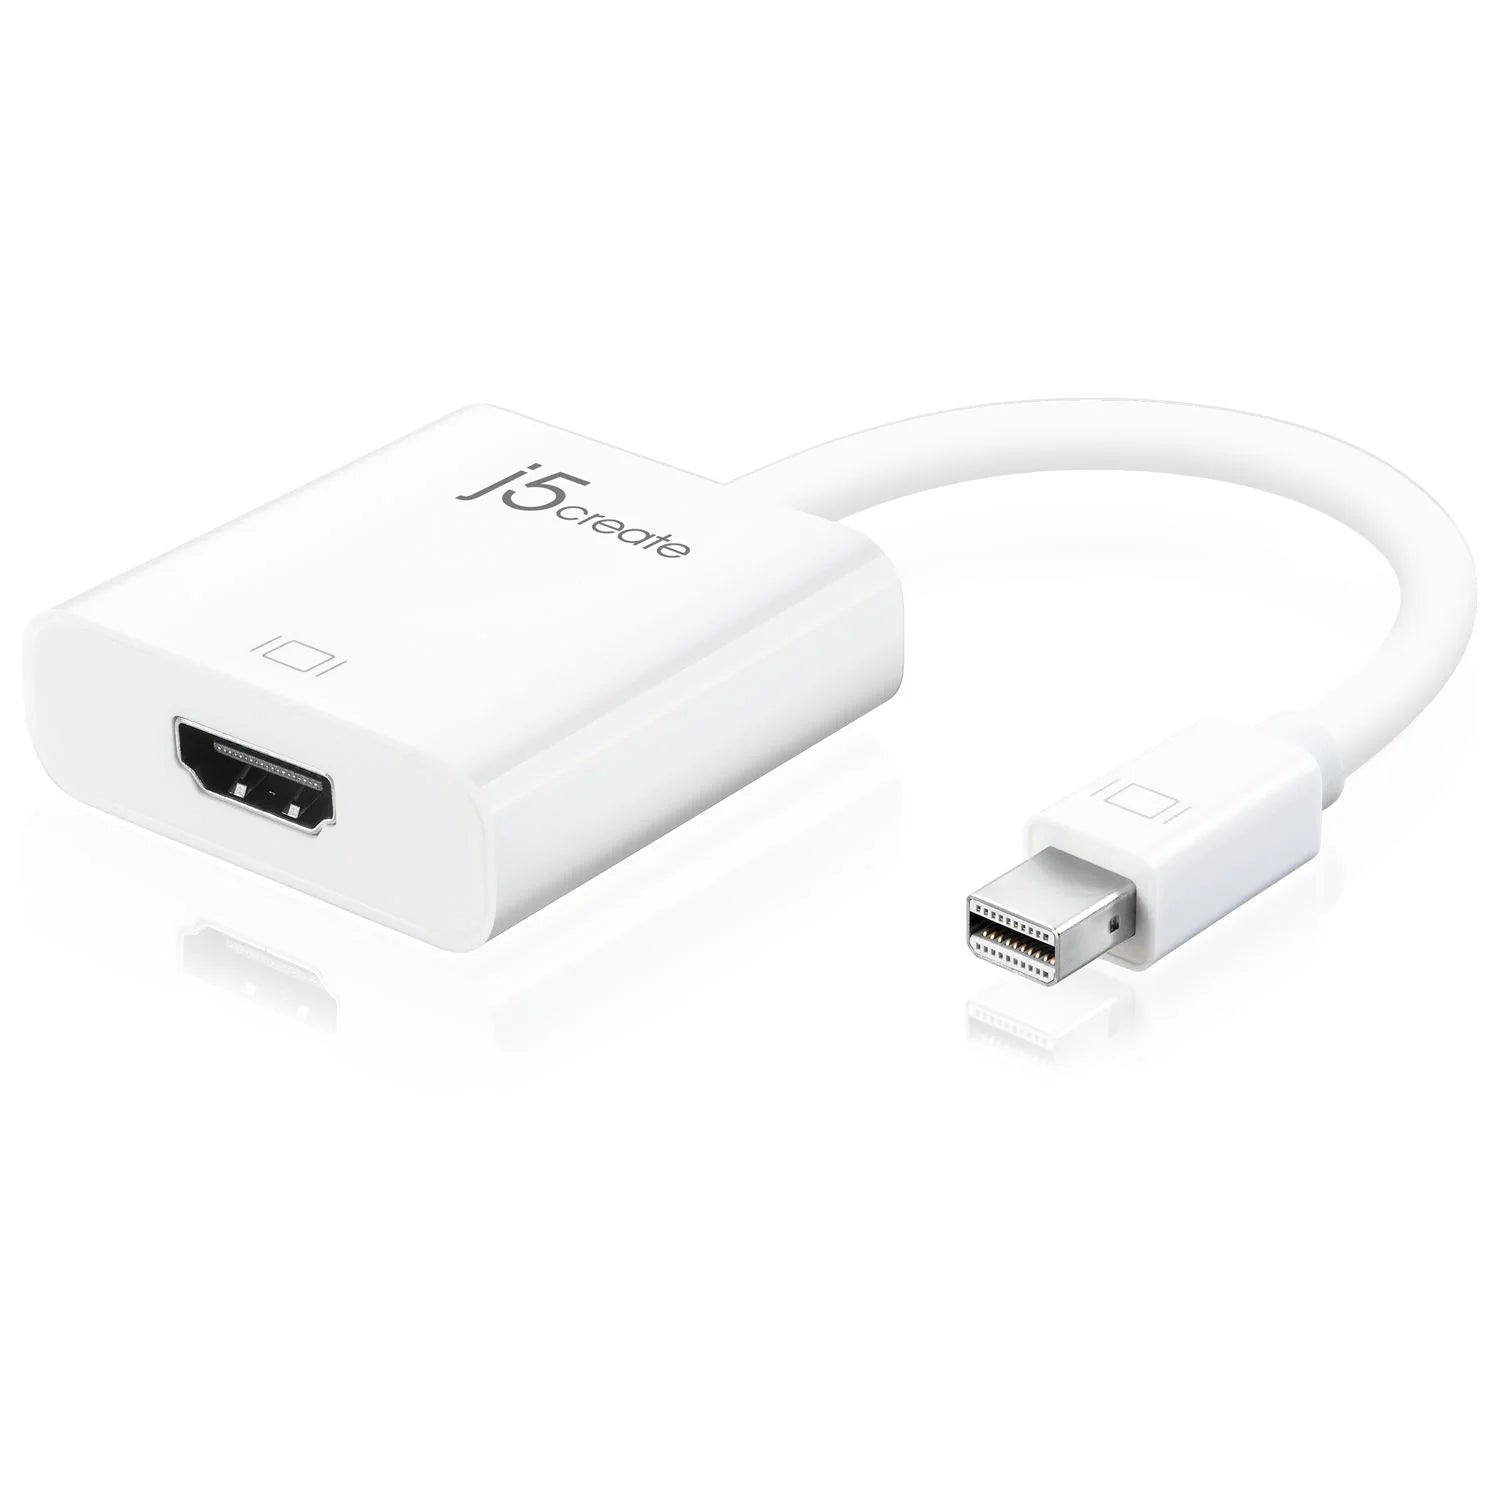 J5create Mini Display Port to HDMI Adapter | Color White | Best Cables and Adapters | Mobile Accessories in Bahrain | Halabh